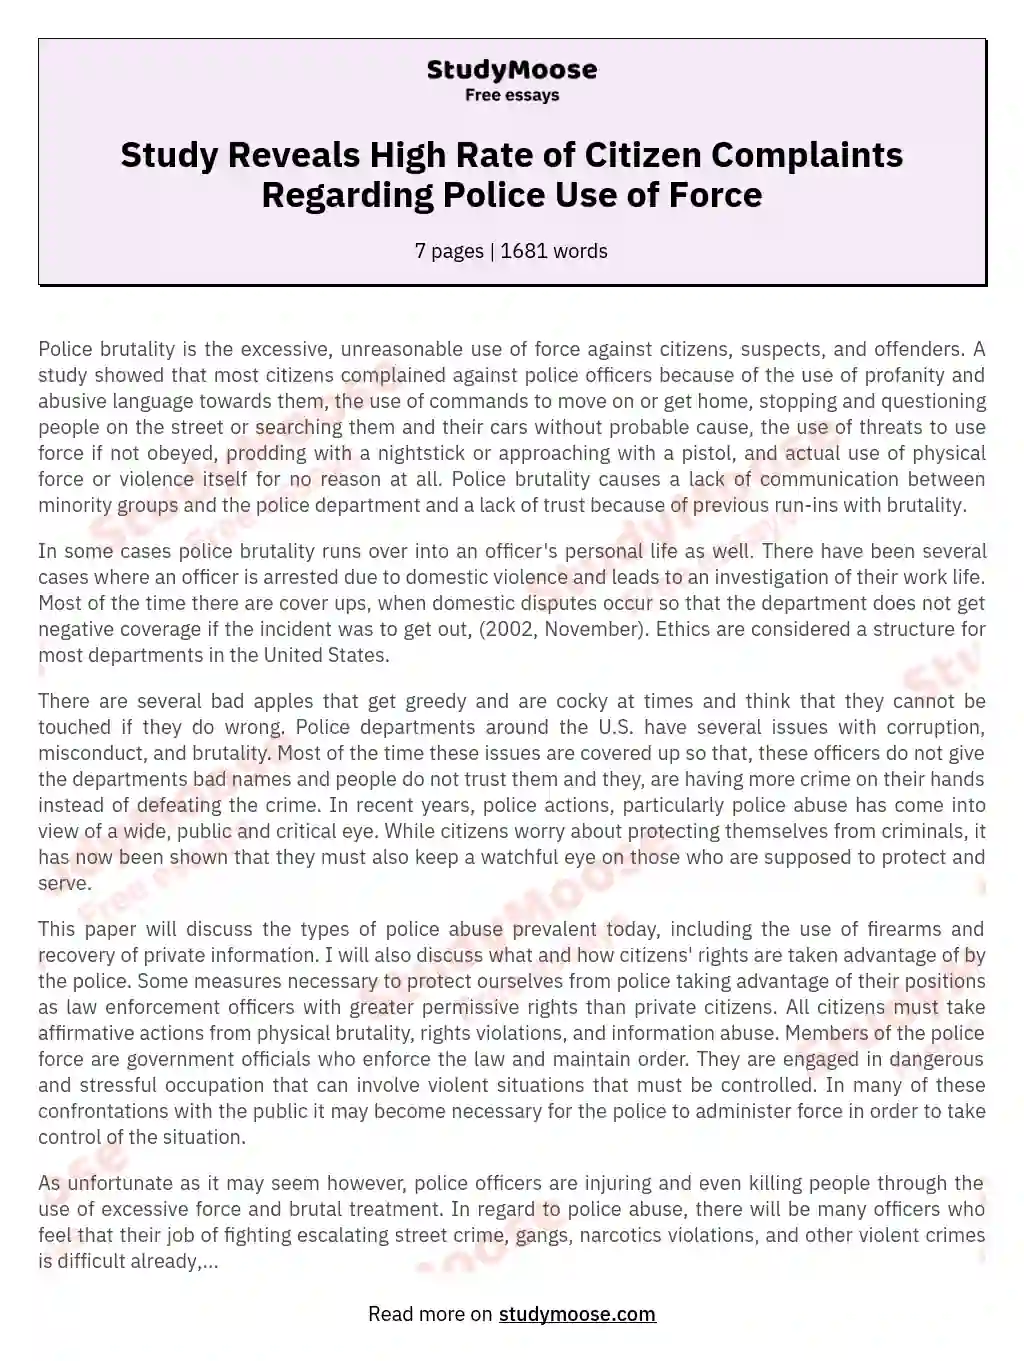 Study Reveals High Rate of Citizen Complaints Regarding Police Use of Force essay